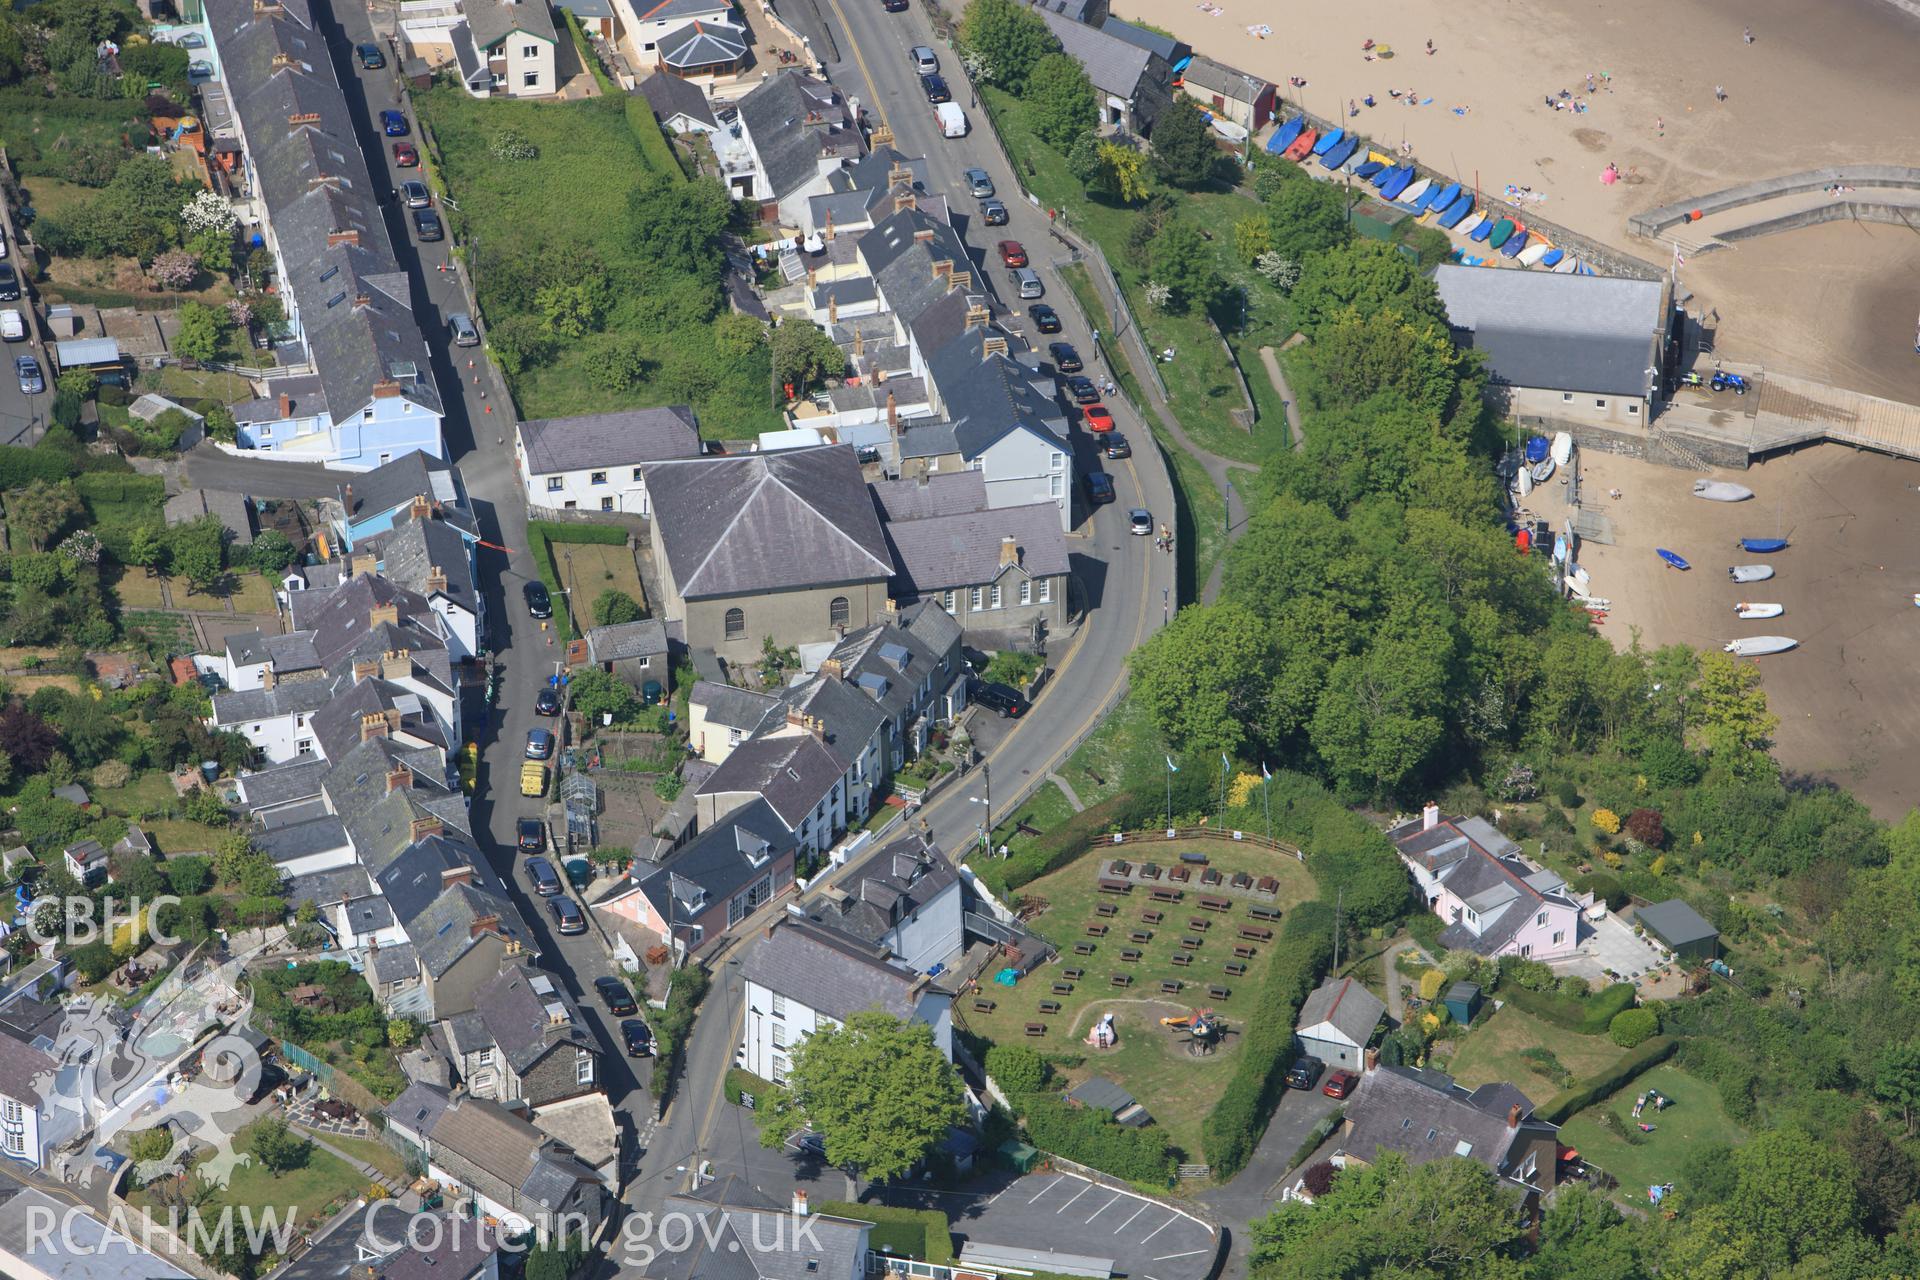 RCAHMW colour oblique photograph of Newquay, town scape. Taken by Toby Driver on 25/05/2010.